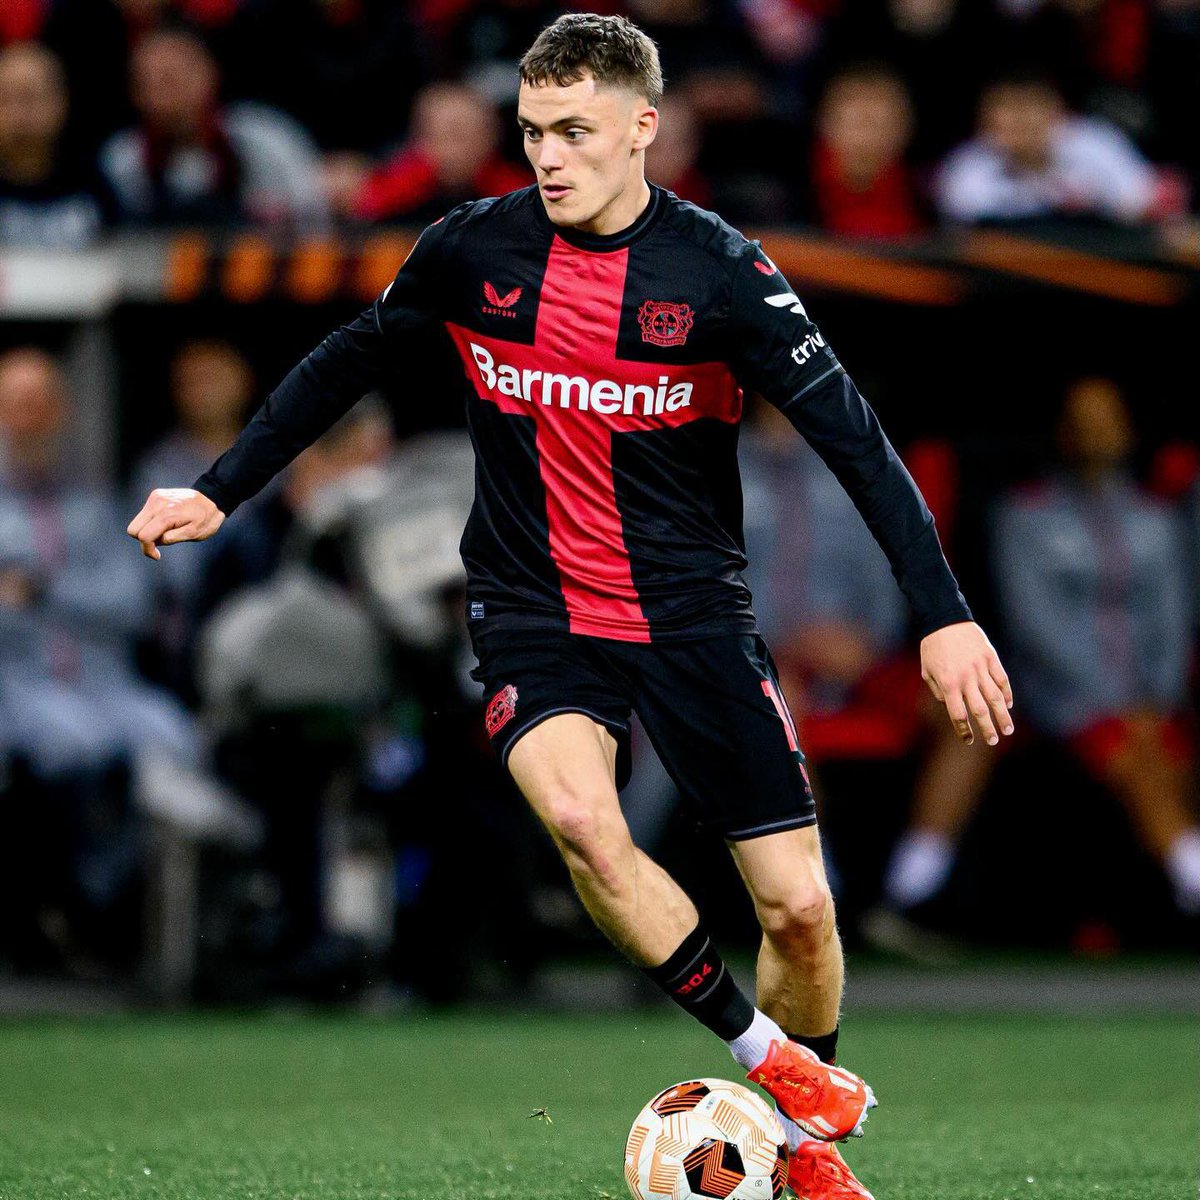 “The best midfielder to come through the club in 30 years” - Kolner Express This season Florian Wirtz was a key player in Bayer Leverkusen winning their first Bundesliga title. Next season in the Champions League with Alonso. Summer 2025, do Manchester City make a move?🧵